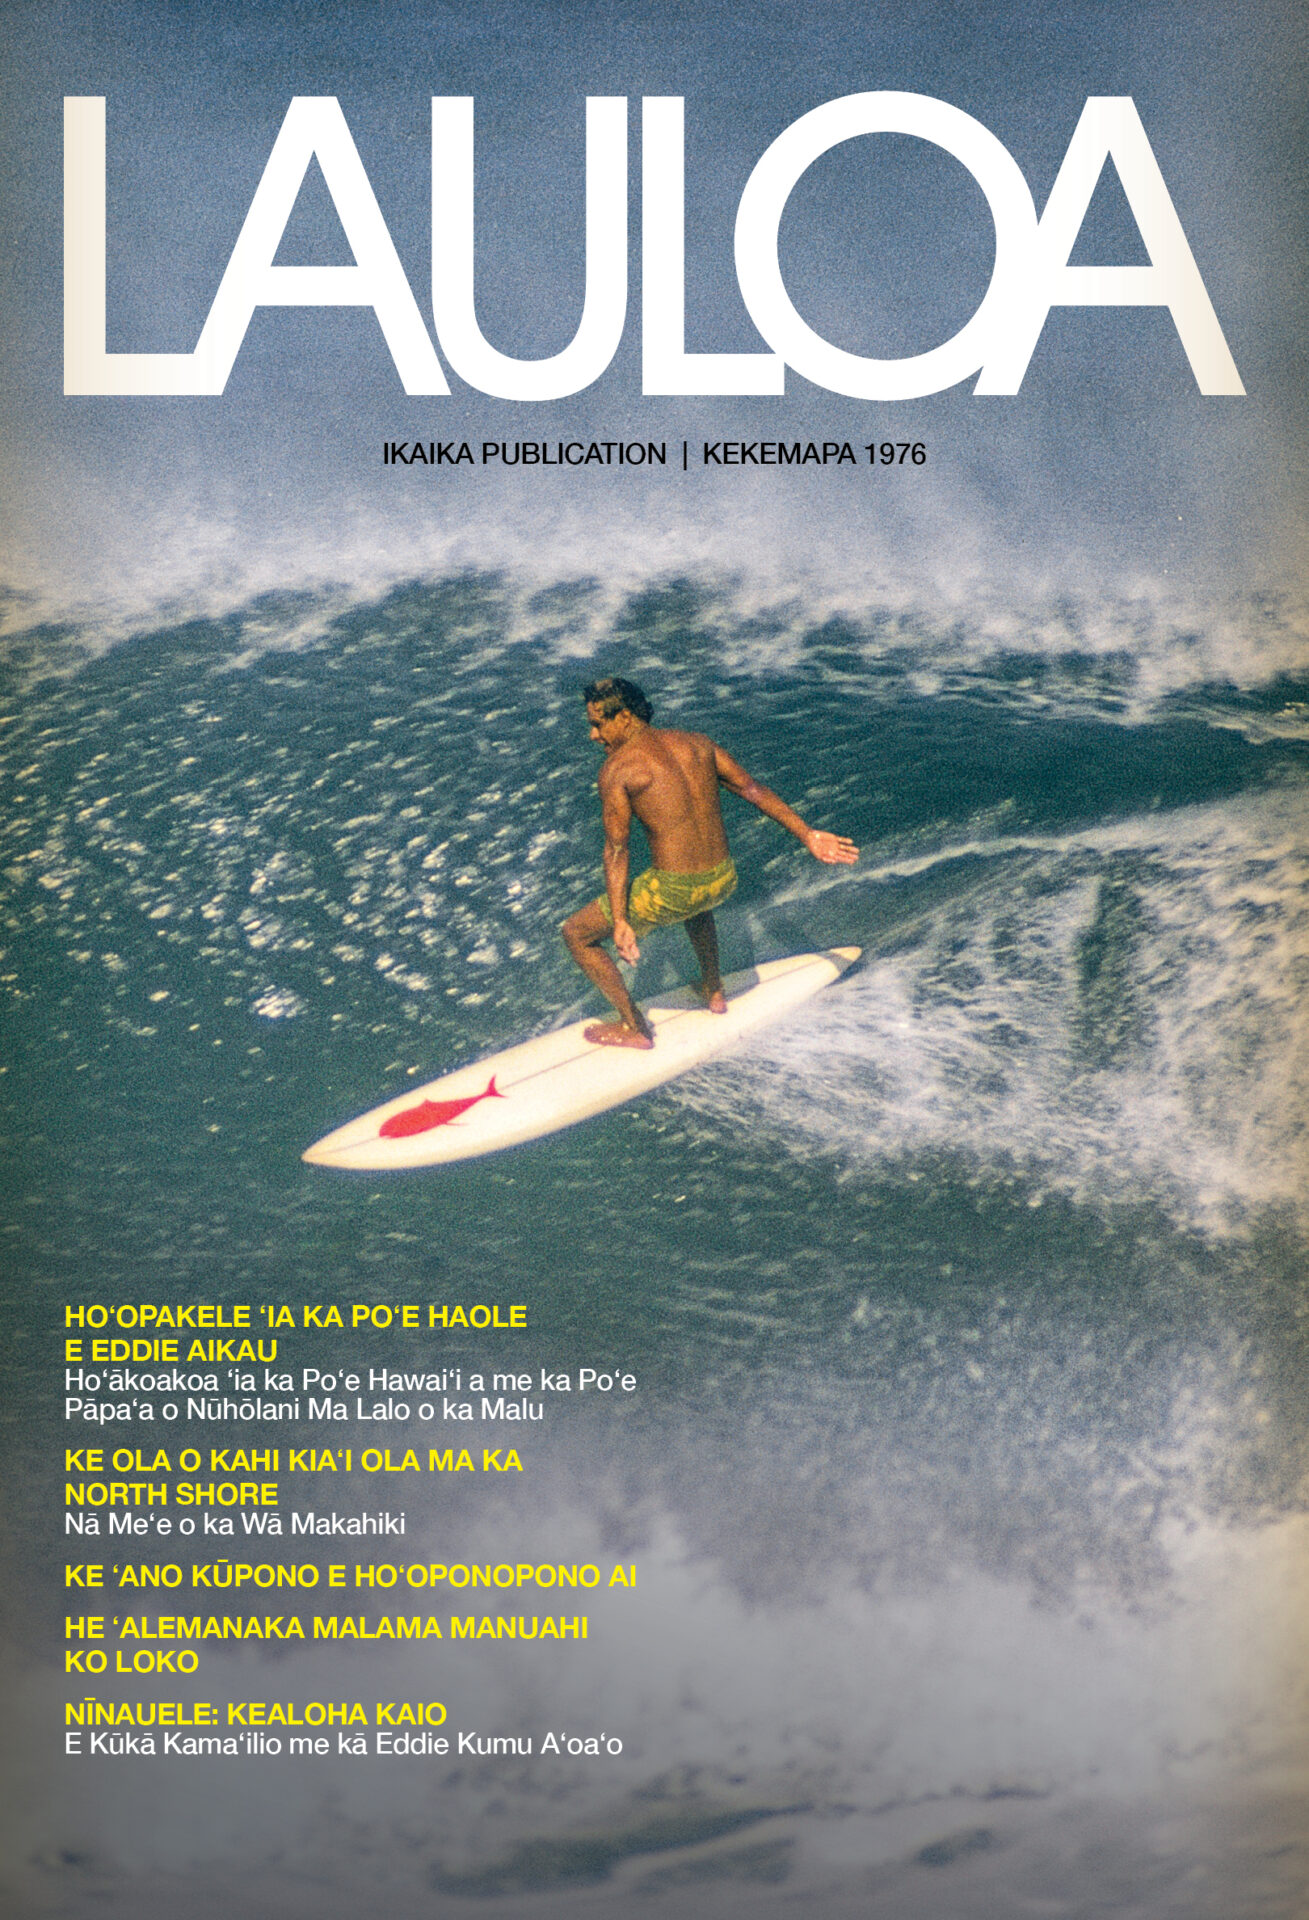 A man on a surfboard riding a wave on the cover of a magazine.